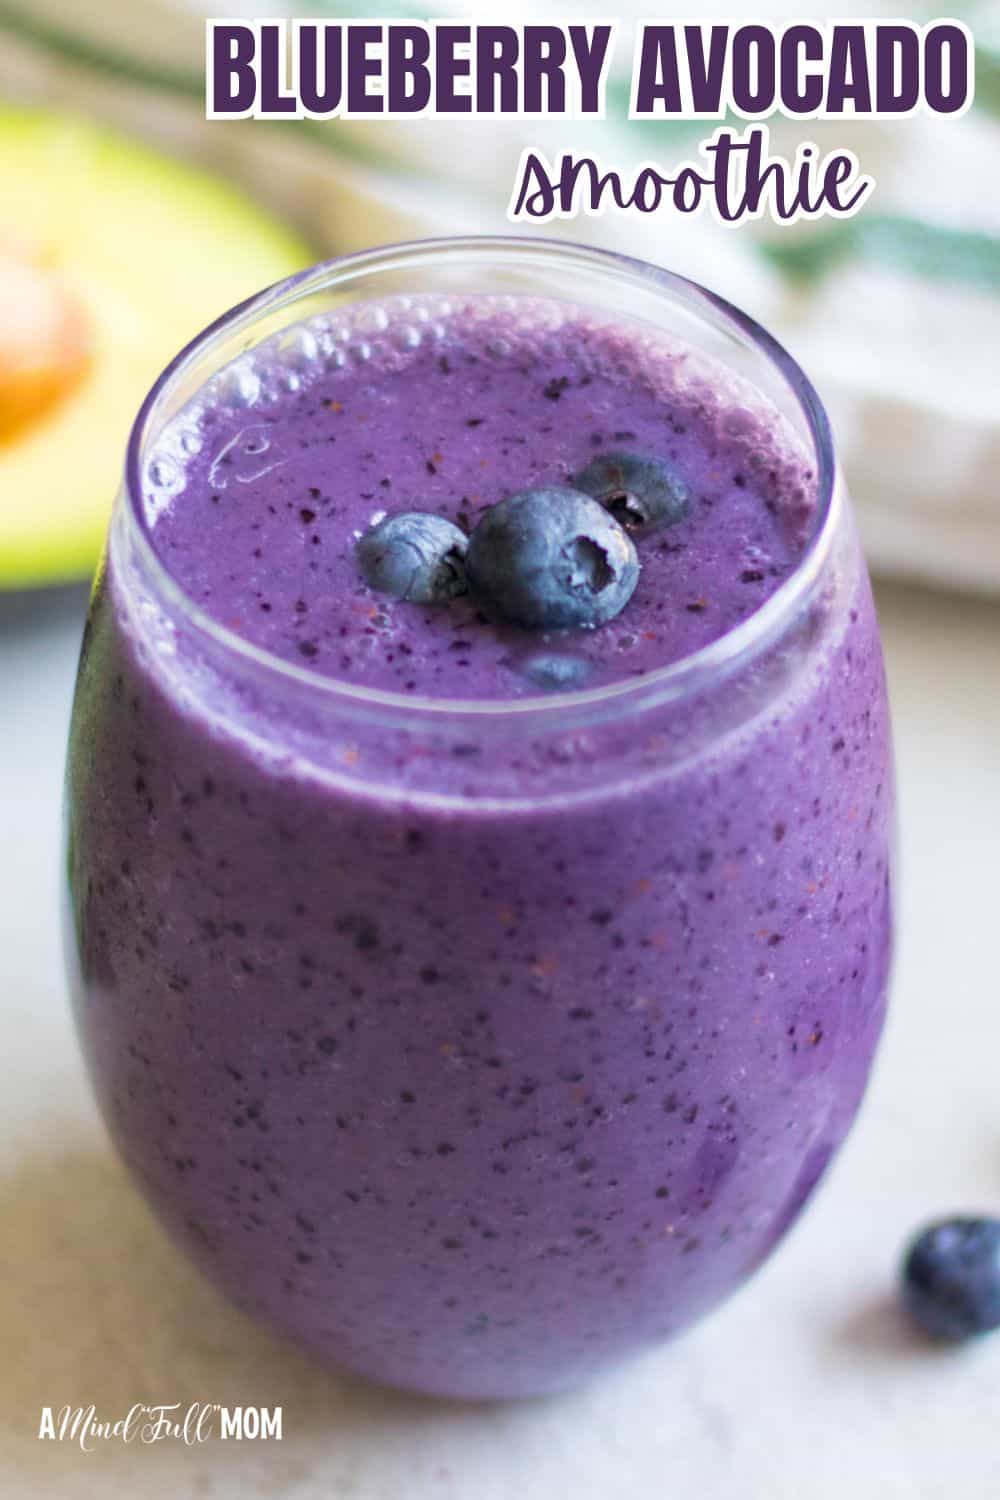 Made with antioxidant rich blueberries and creamy avocado, this Blueberry Avocado Smoothie is both delicious and nutritious.